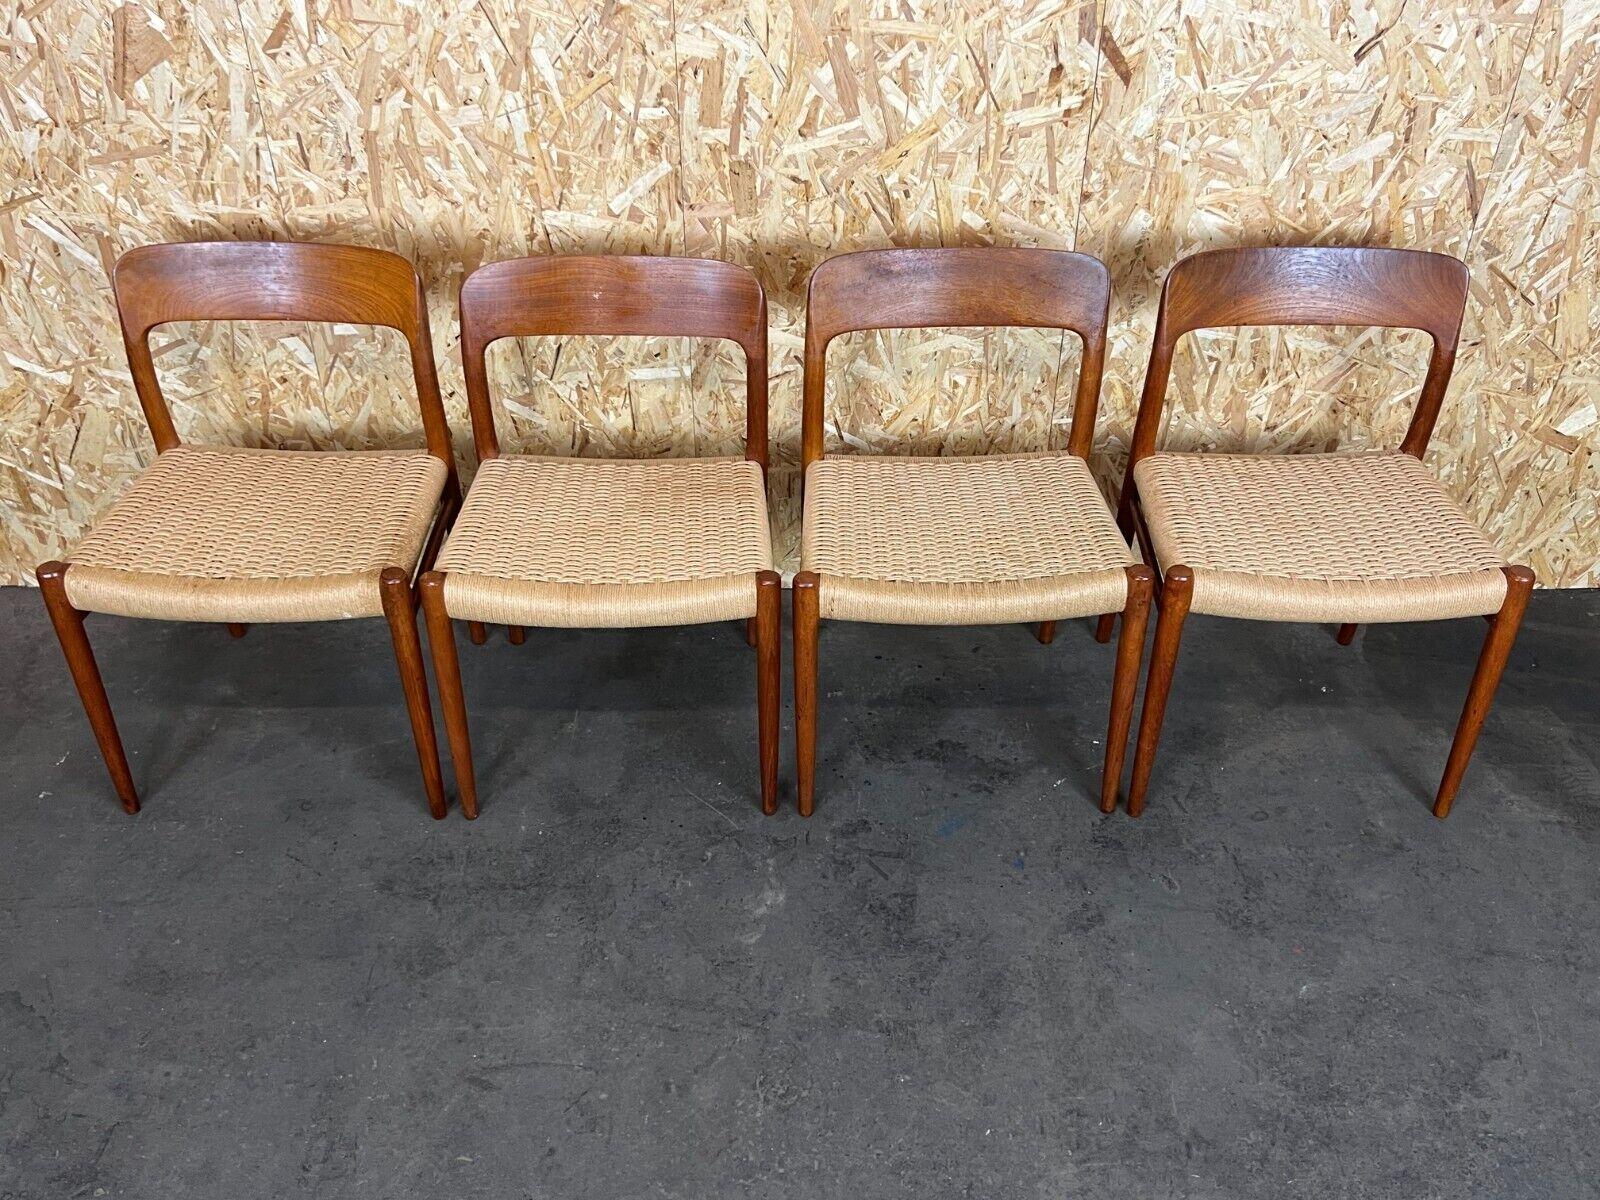 70s dining chairs